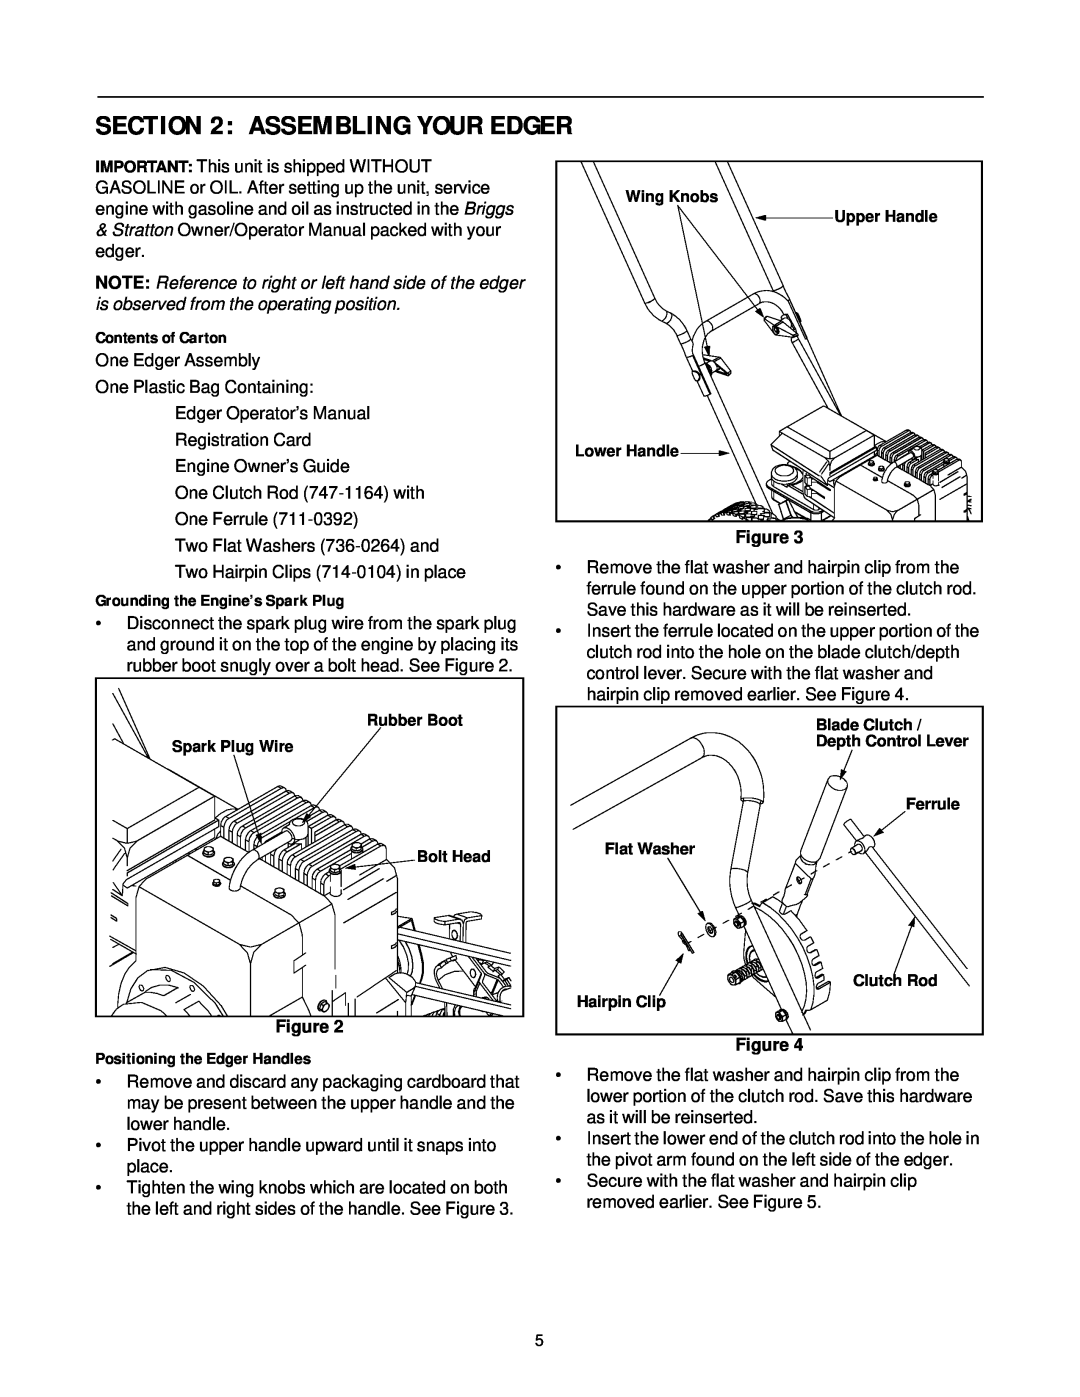 Briggs & Stratton 592 manual Assembling Your Edger, Contents of Carton, Grounding the Engine’s Spark Plug 